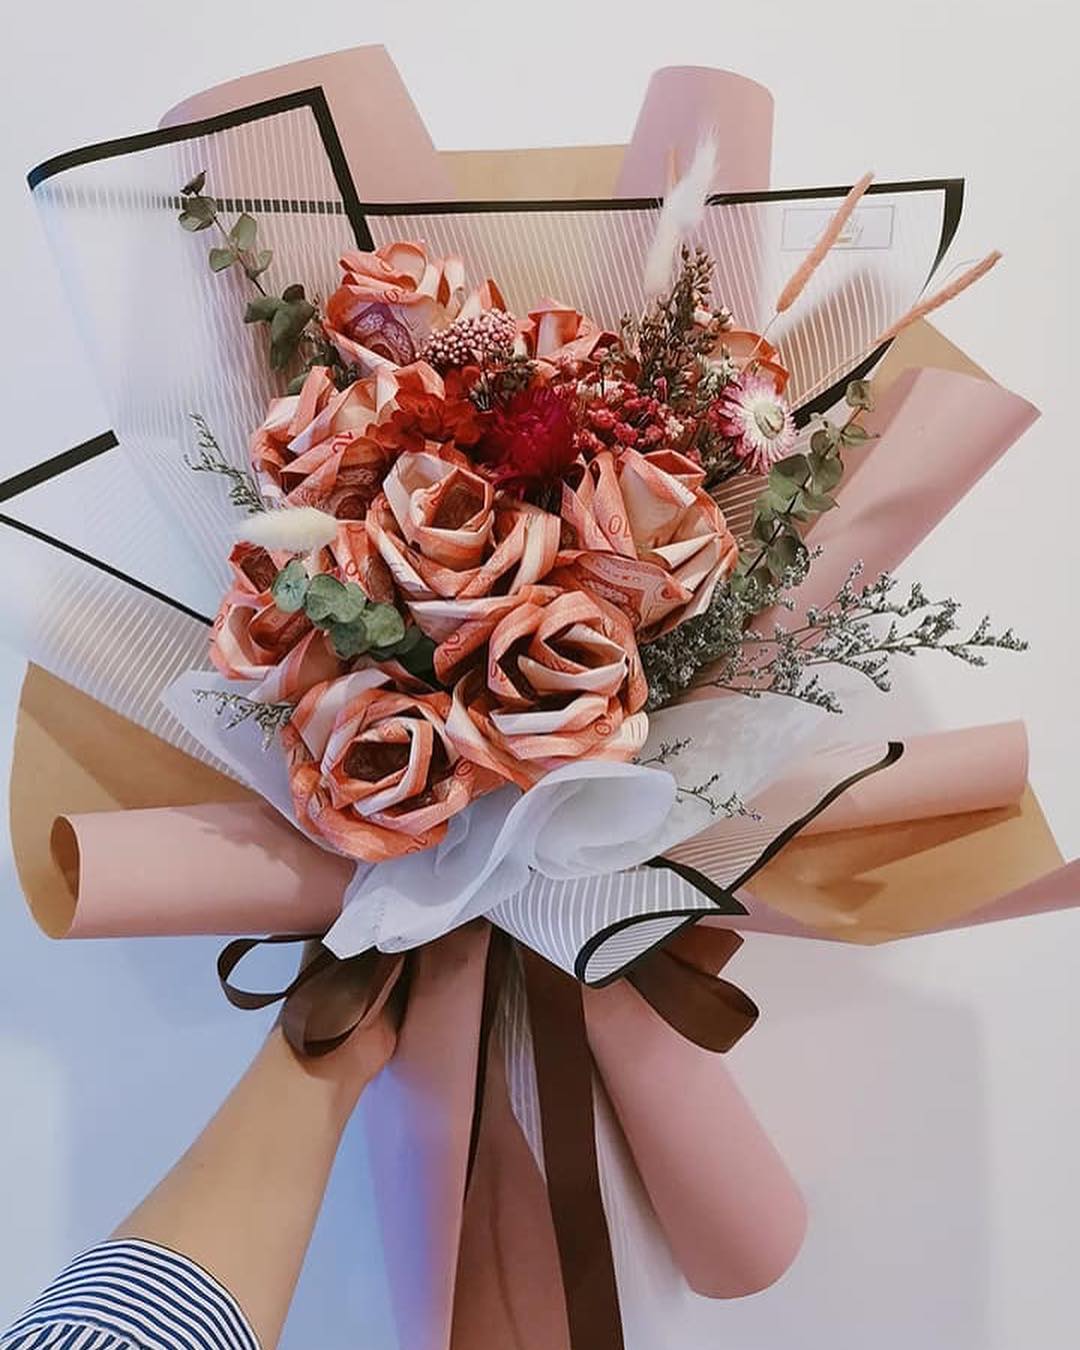 X Unique Bouquets You Can Get In KL This Valentines Day - WORLD OF BUZZ 6